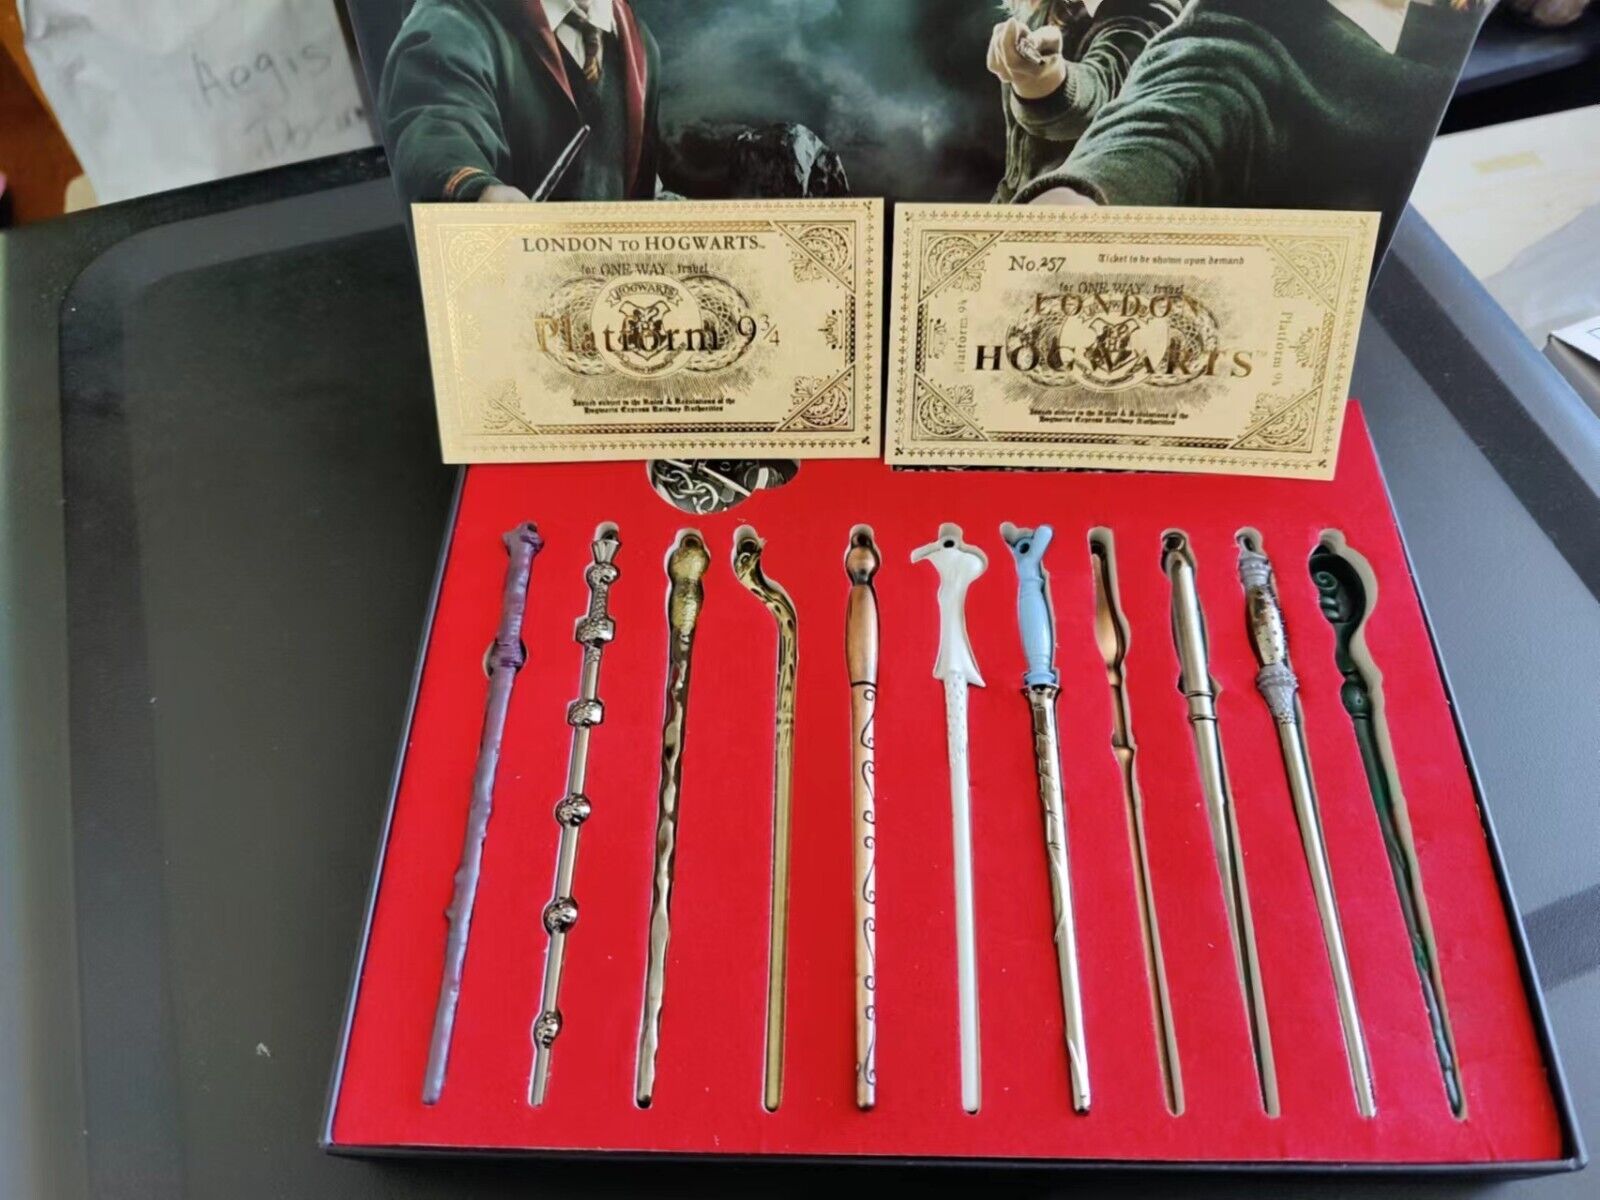 New Harry Potter New Edition Magic Wands And 2 Tickets Cards Great Gift Box Set